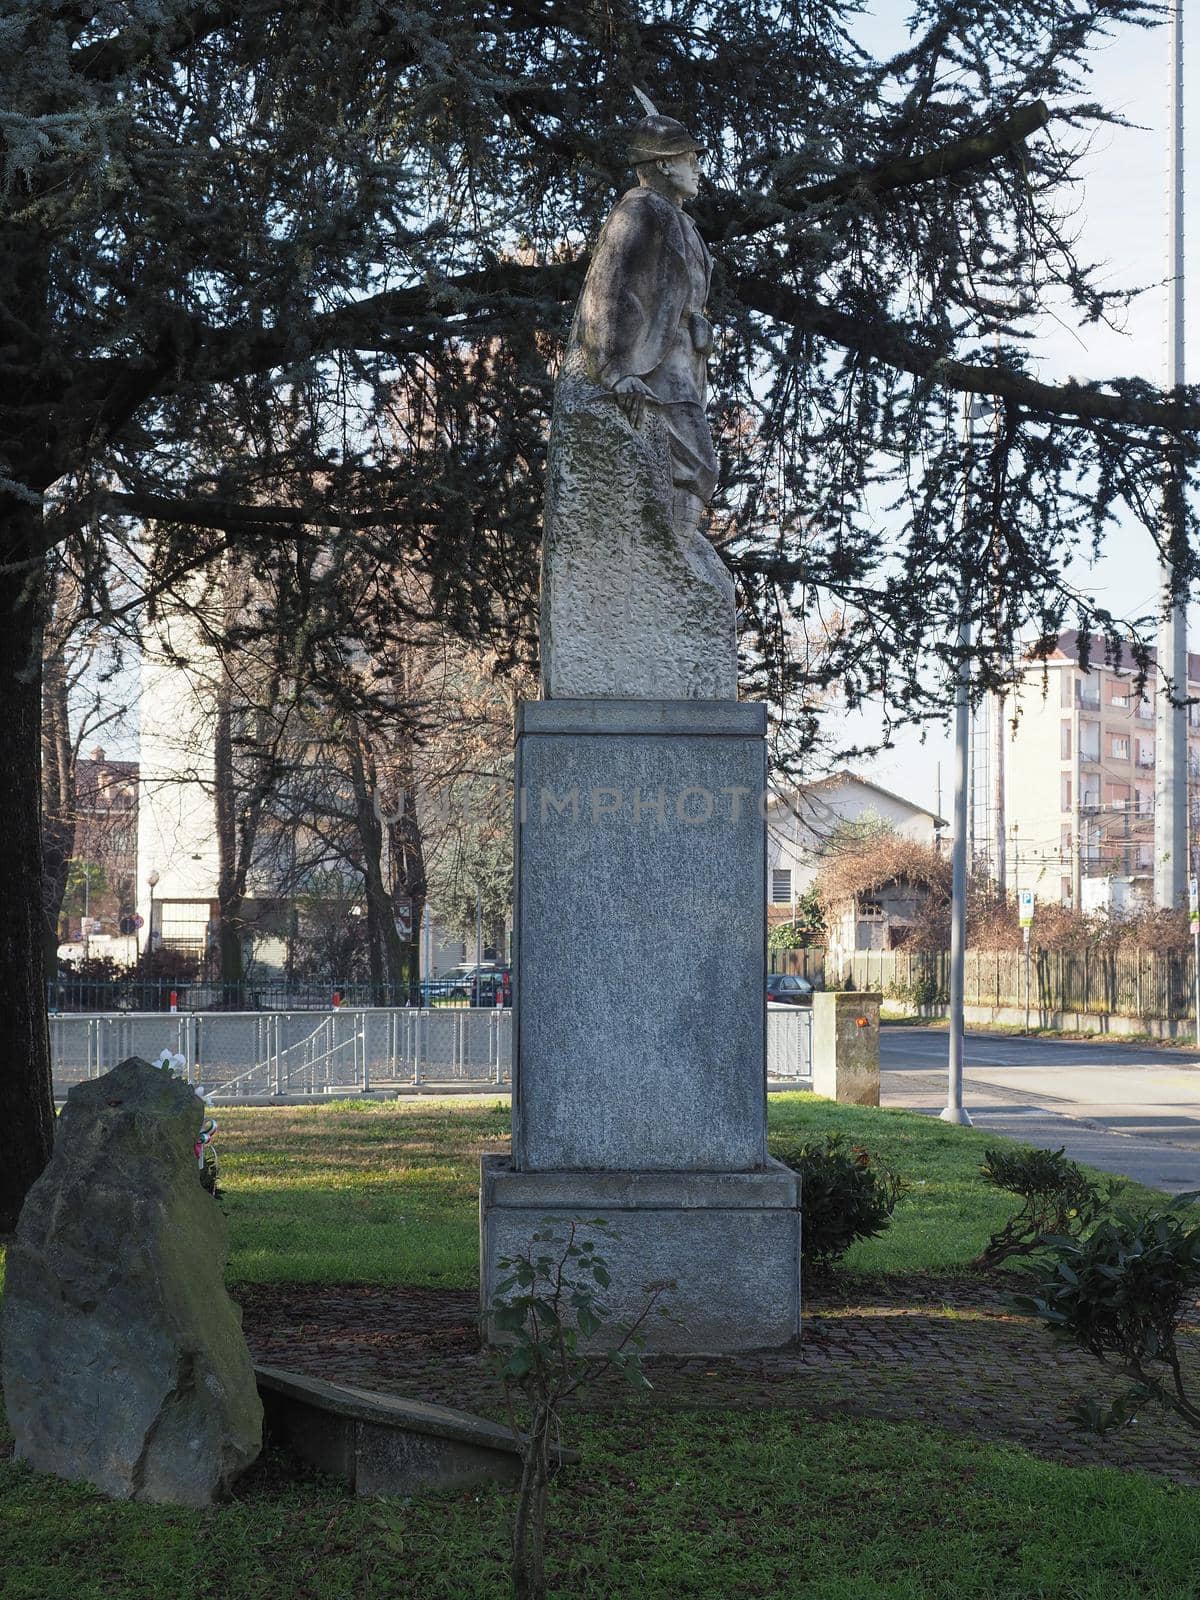 Alpini soldier monument in Settimo Torinese, Italy